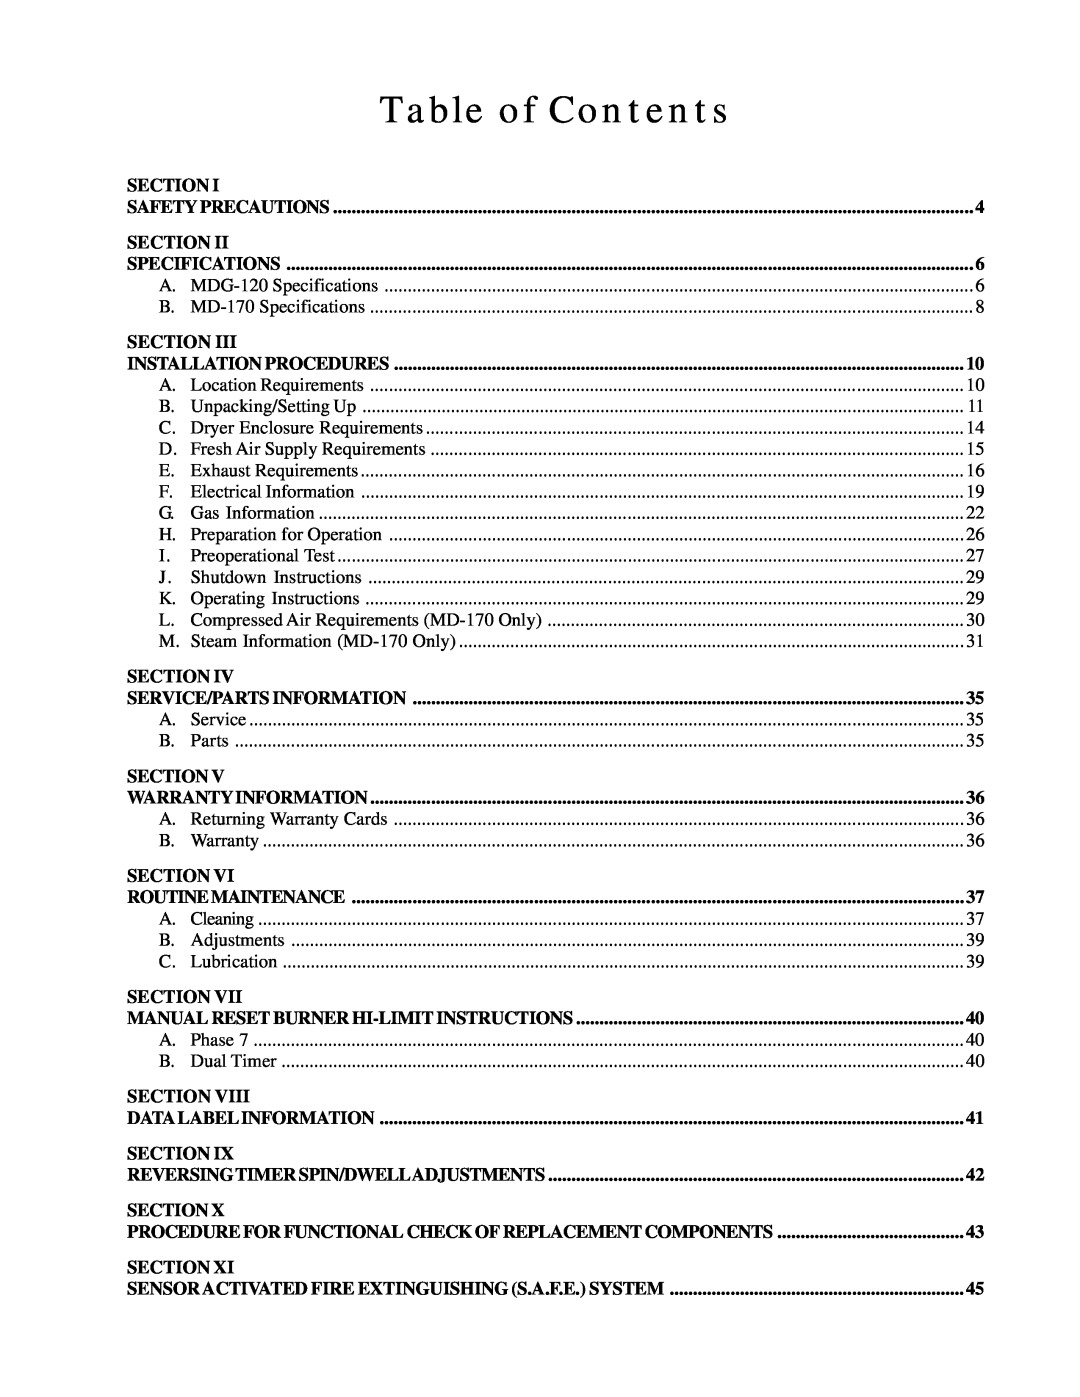 American Dryer Corp MDG-120PVV, MD-170PTVW installation manual Table of Contents, Section 